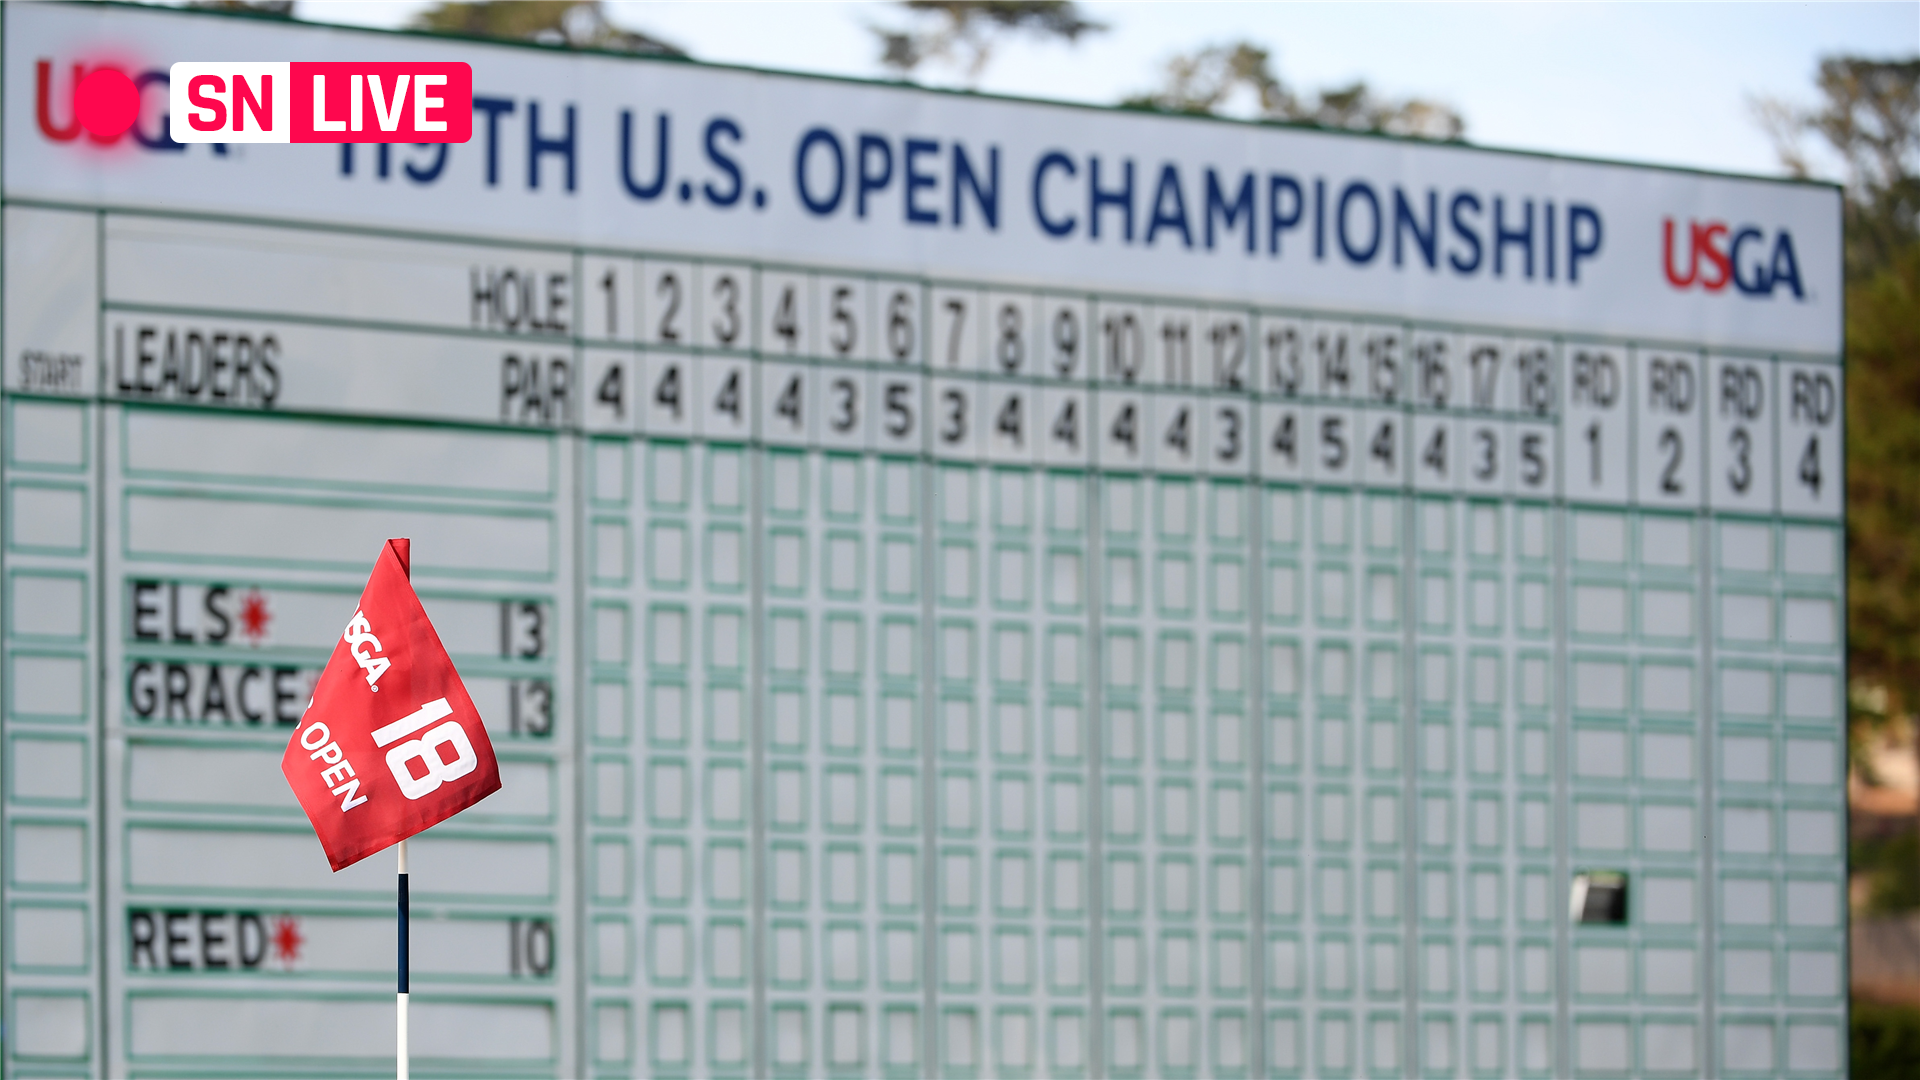 U.S. Open 2019 leaderboard Live golf scores, results from Sunday's